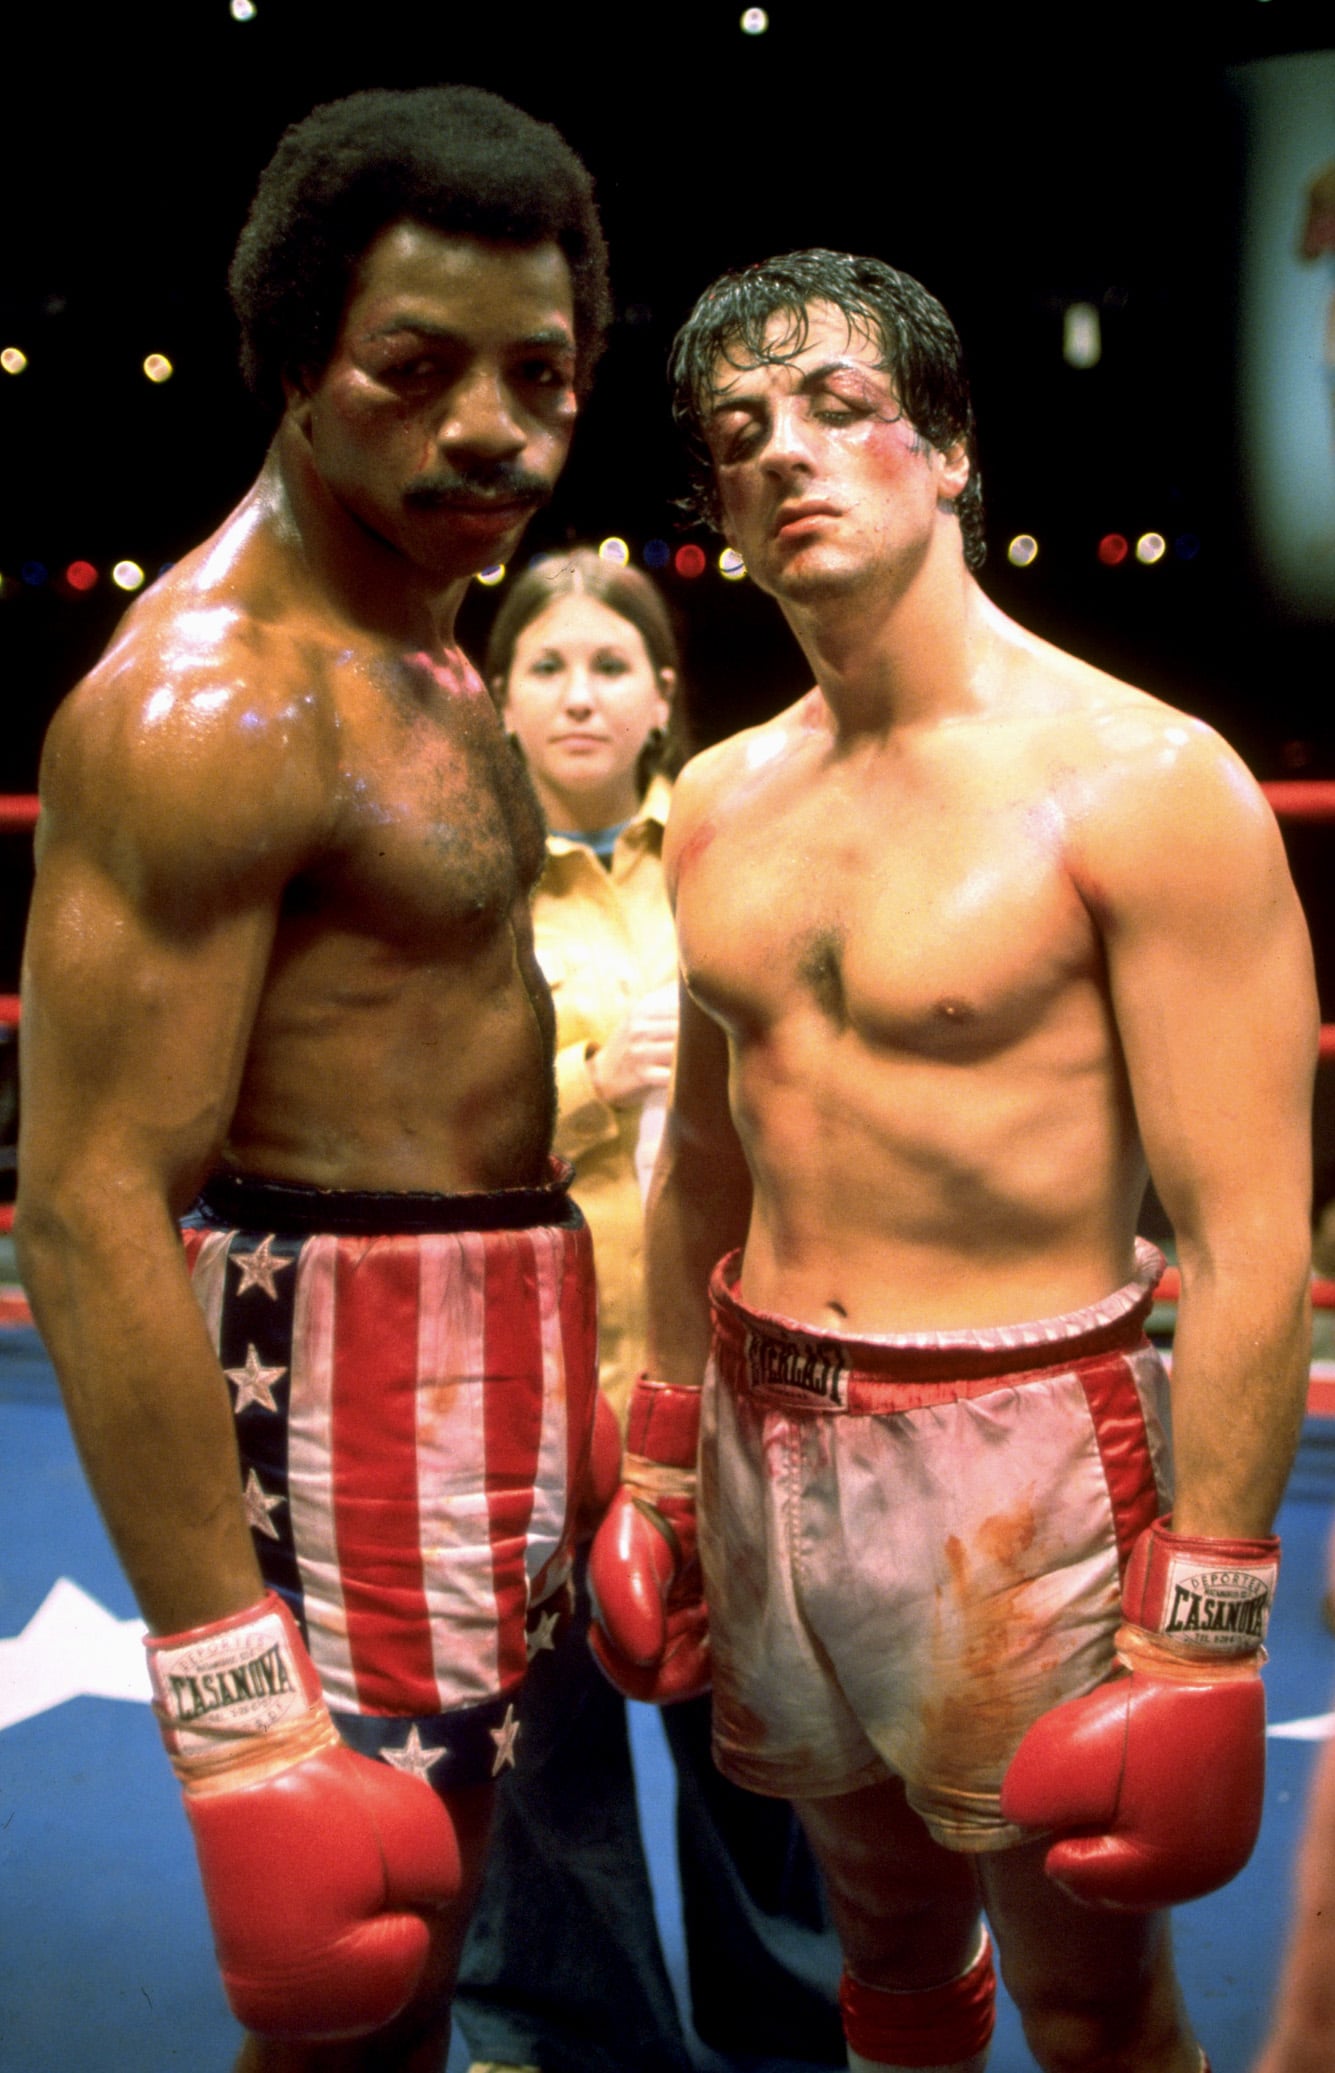 ROCKY, Carl Weathers, Sylvester Stallone, 1976